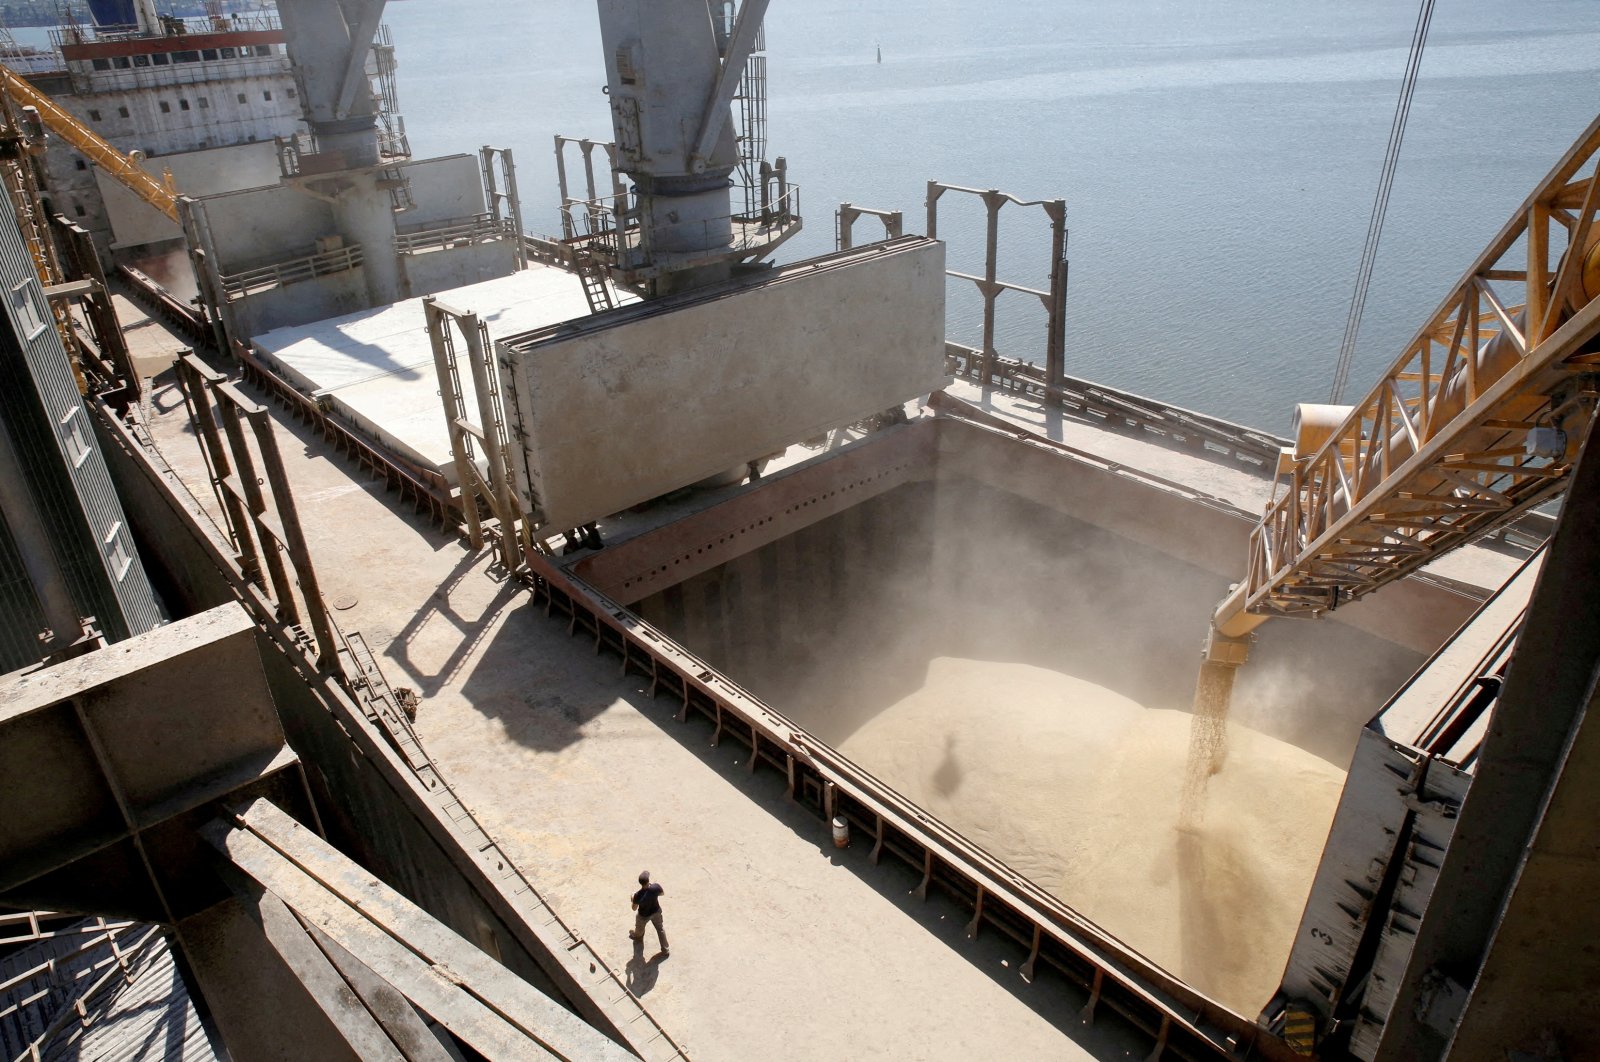 A dockyard worker watches as barley grain is mechanically poured into a 40,000 ton ship at a Ukrainian agricultural exporter&#039;s shipment terminal in Nikolaev, Ukraine, July 9, 2013. (Reuters Photo)